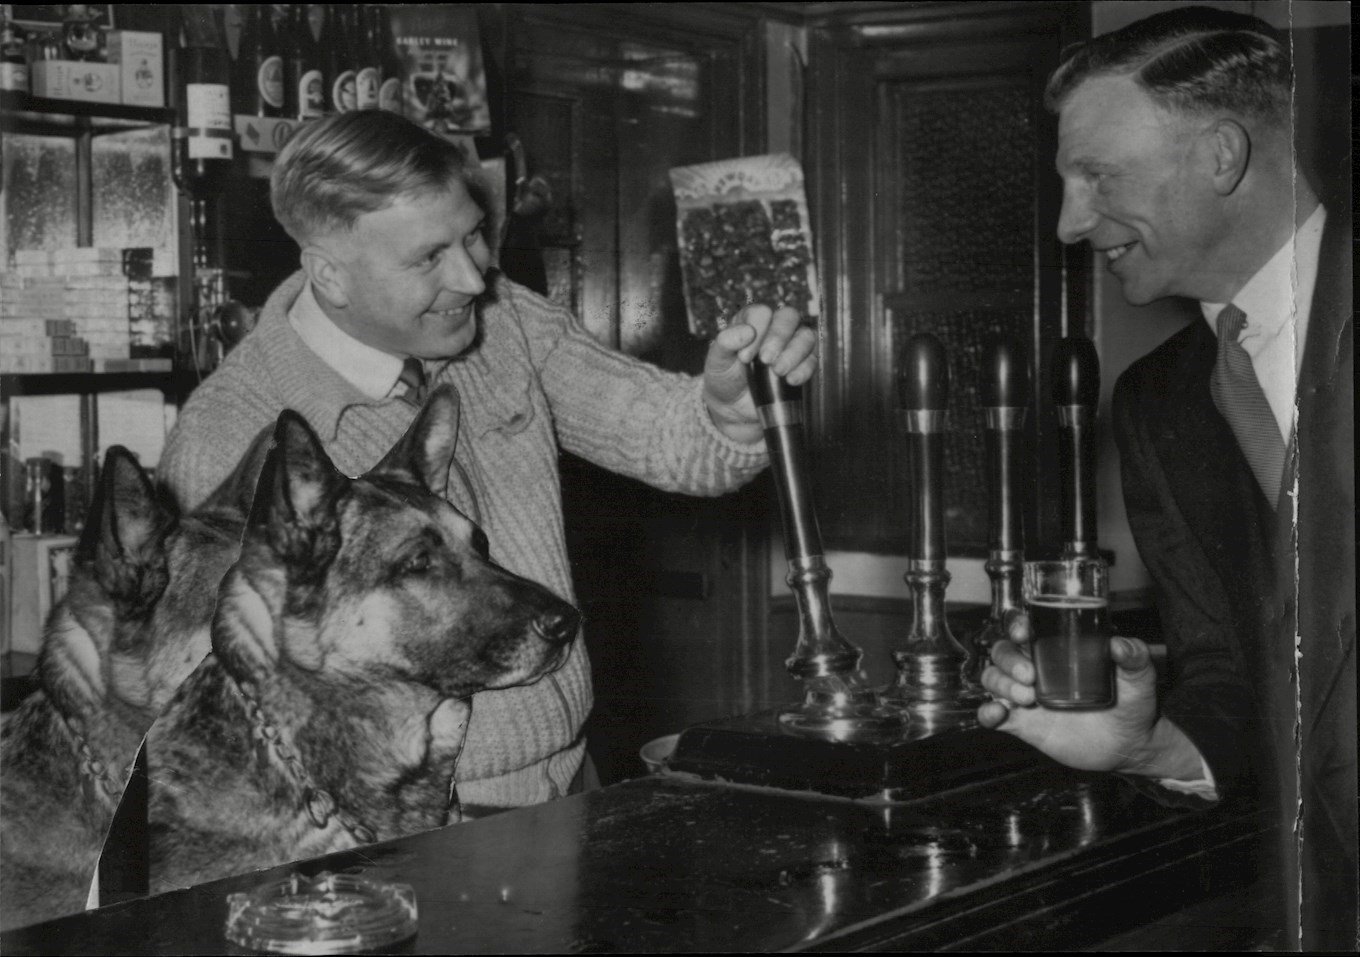 Burton Albion FC Captain Reg Weston (r) Is Served A Drink By Goalkeeper Bill Townsend At His Public House.